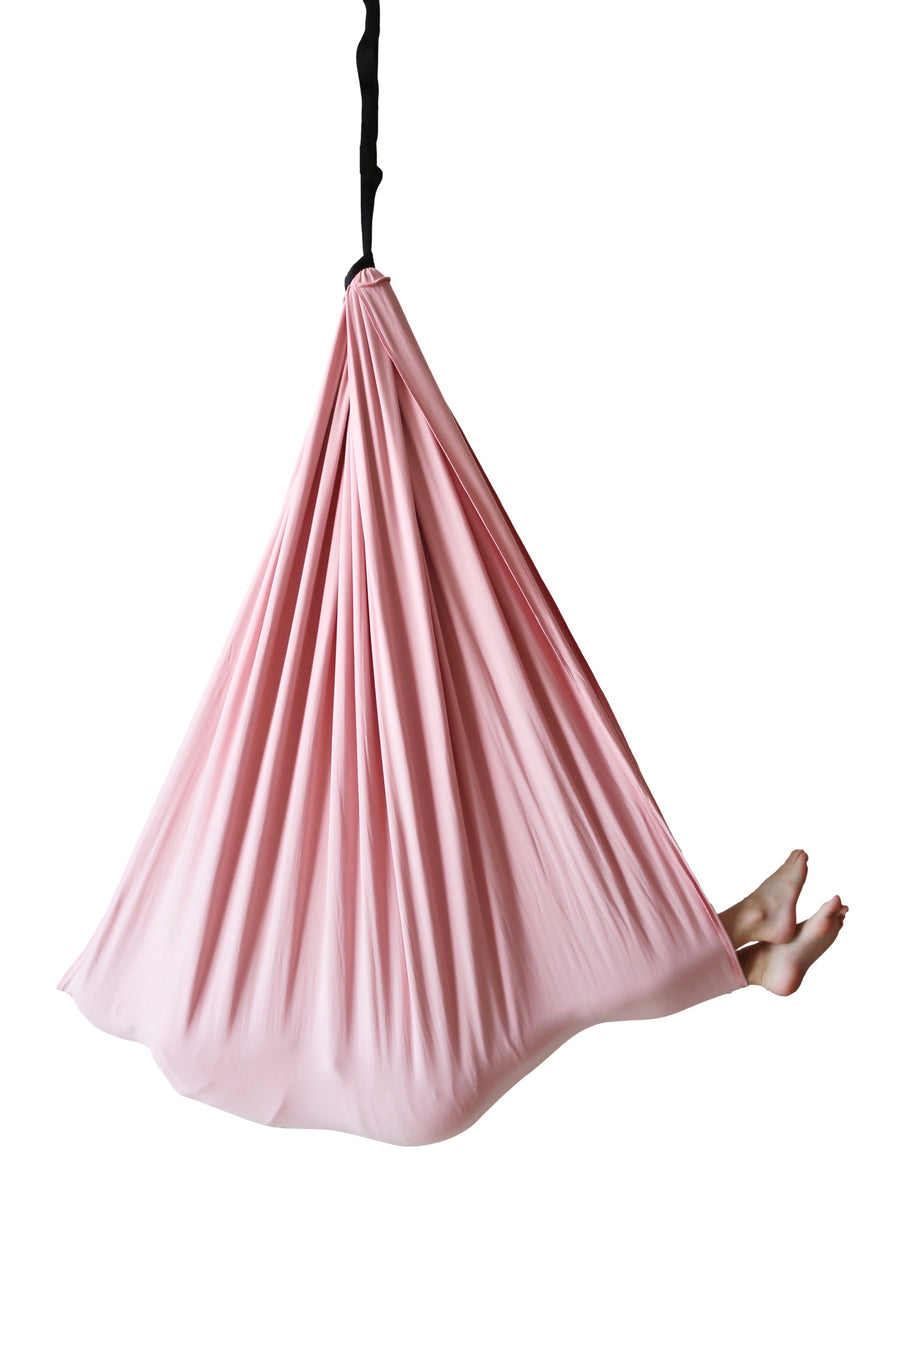 Sensory Swing Fabric Only- No Hardware- Five Color Options